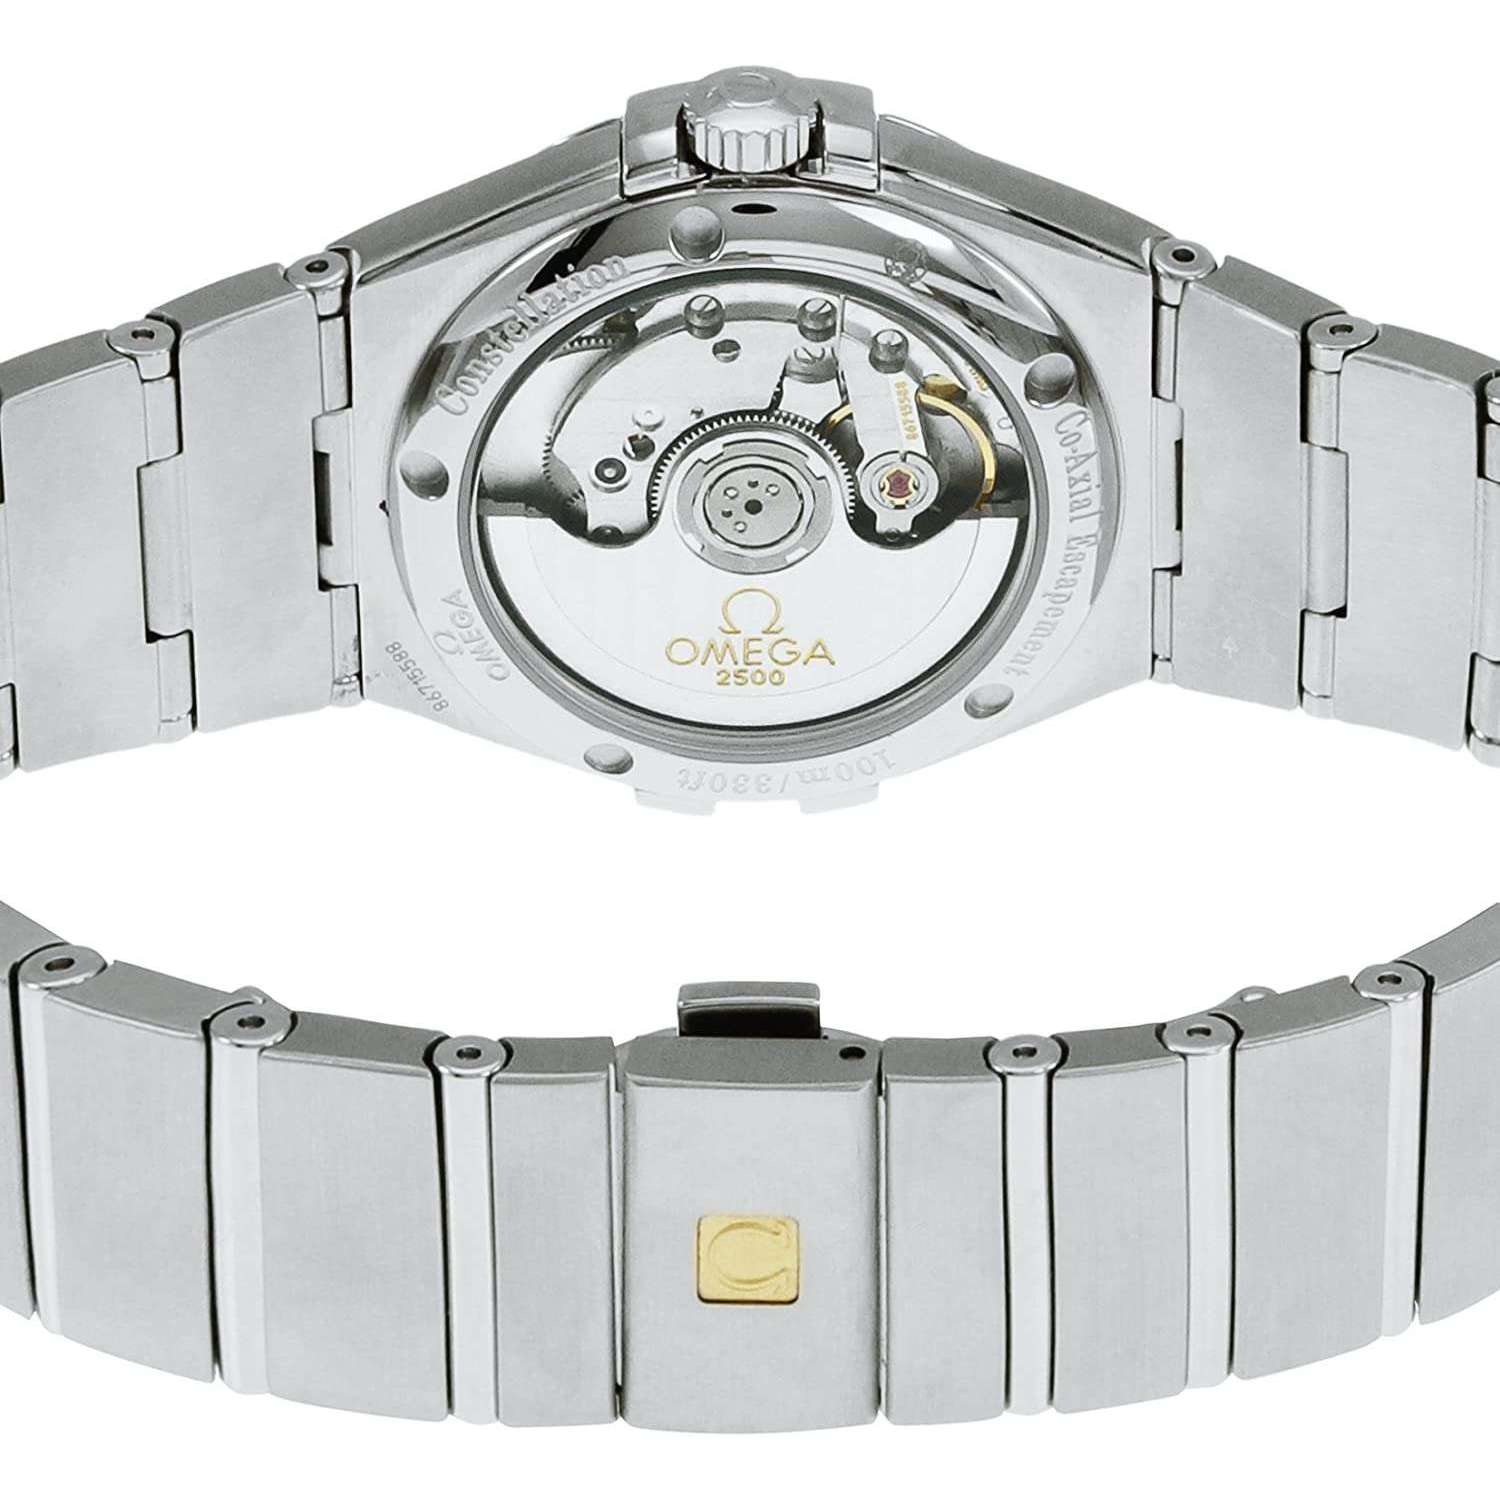 ROOK JAPAN:OMEGA CONSTELLATION CO-AXILE CHONOMETER 37 MM MEN WATCH 123.10.35.20.02.001,Luxury Watch,Omega